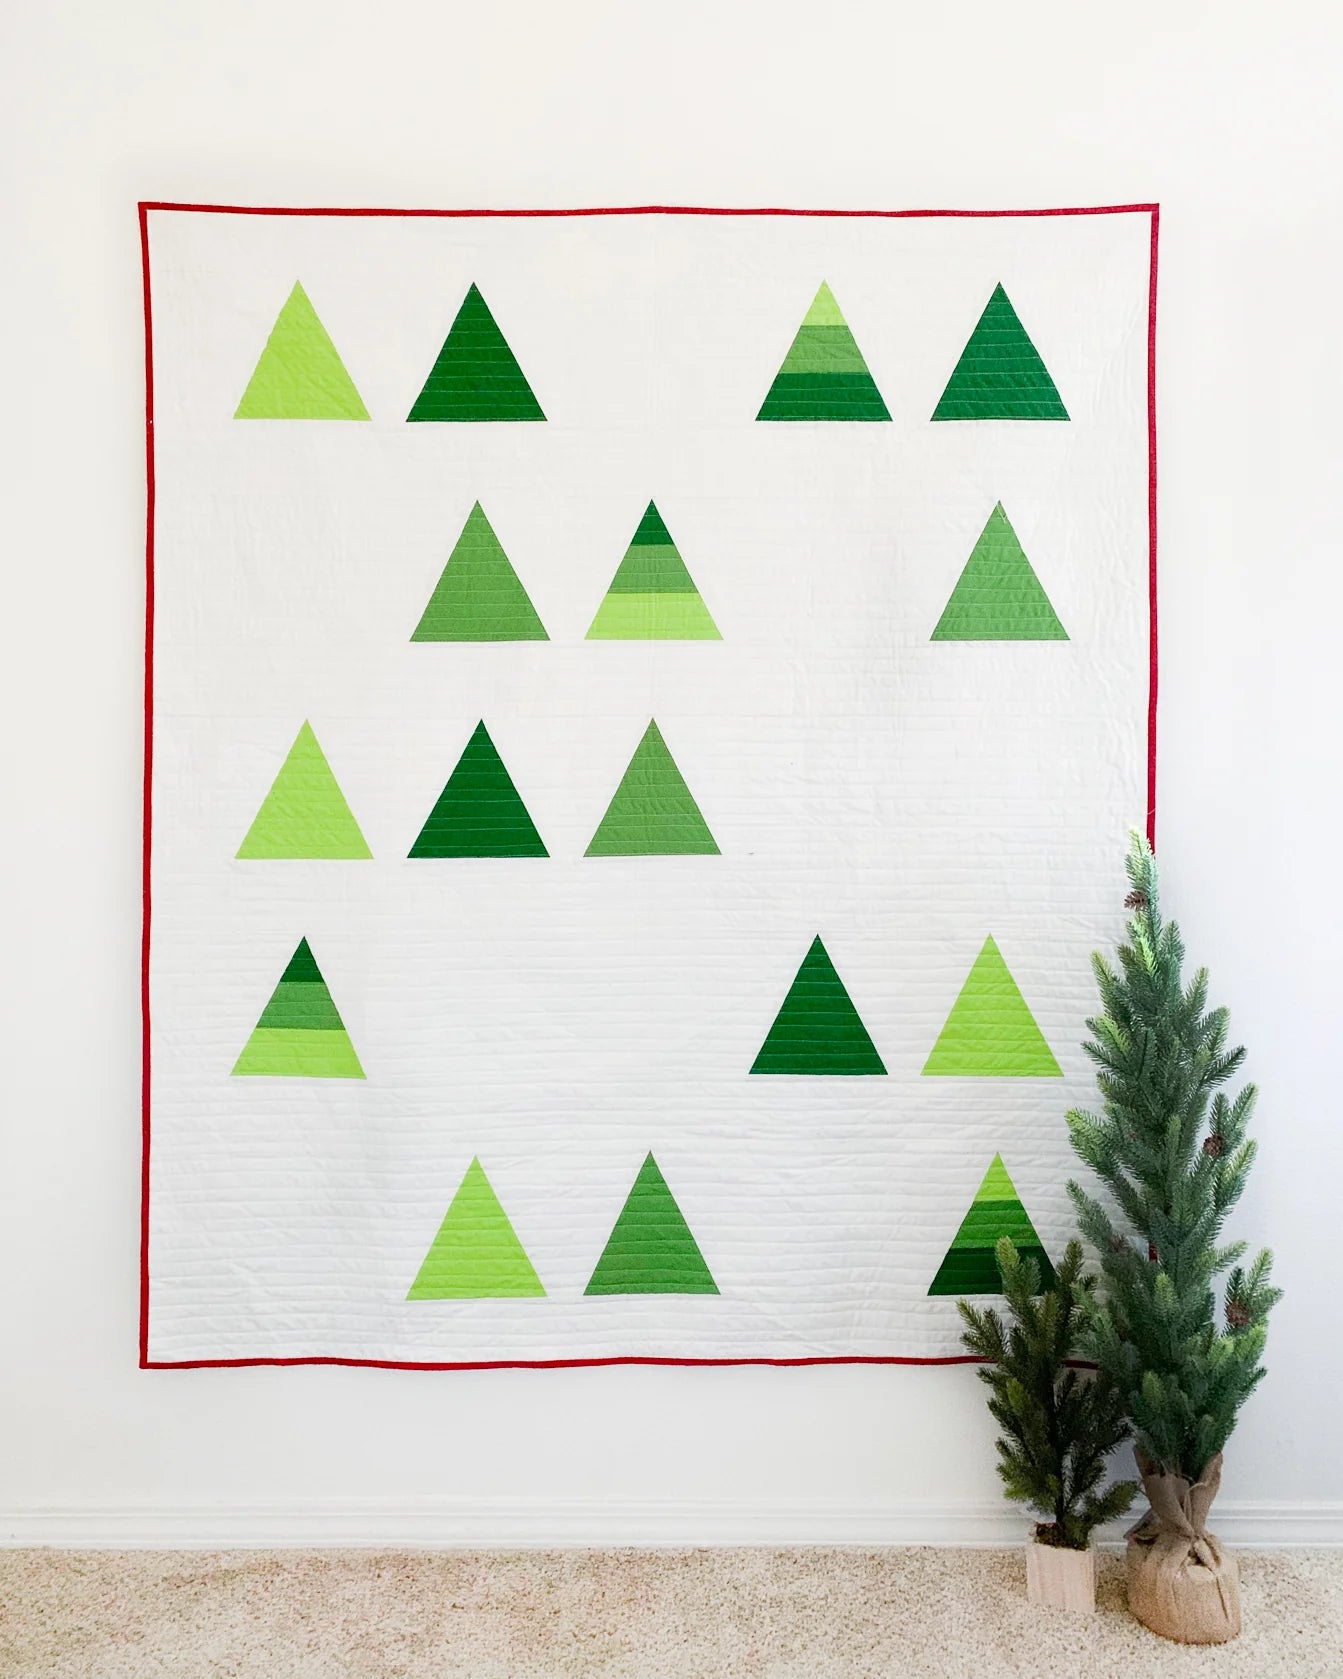 Tree Farm Quilt Pattern featuring triangle templates